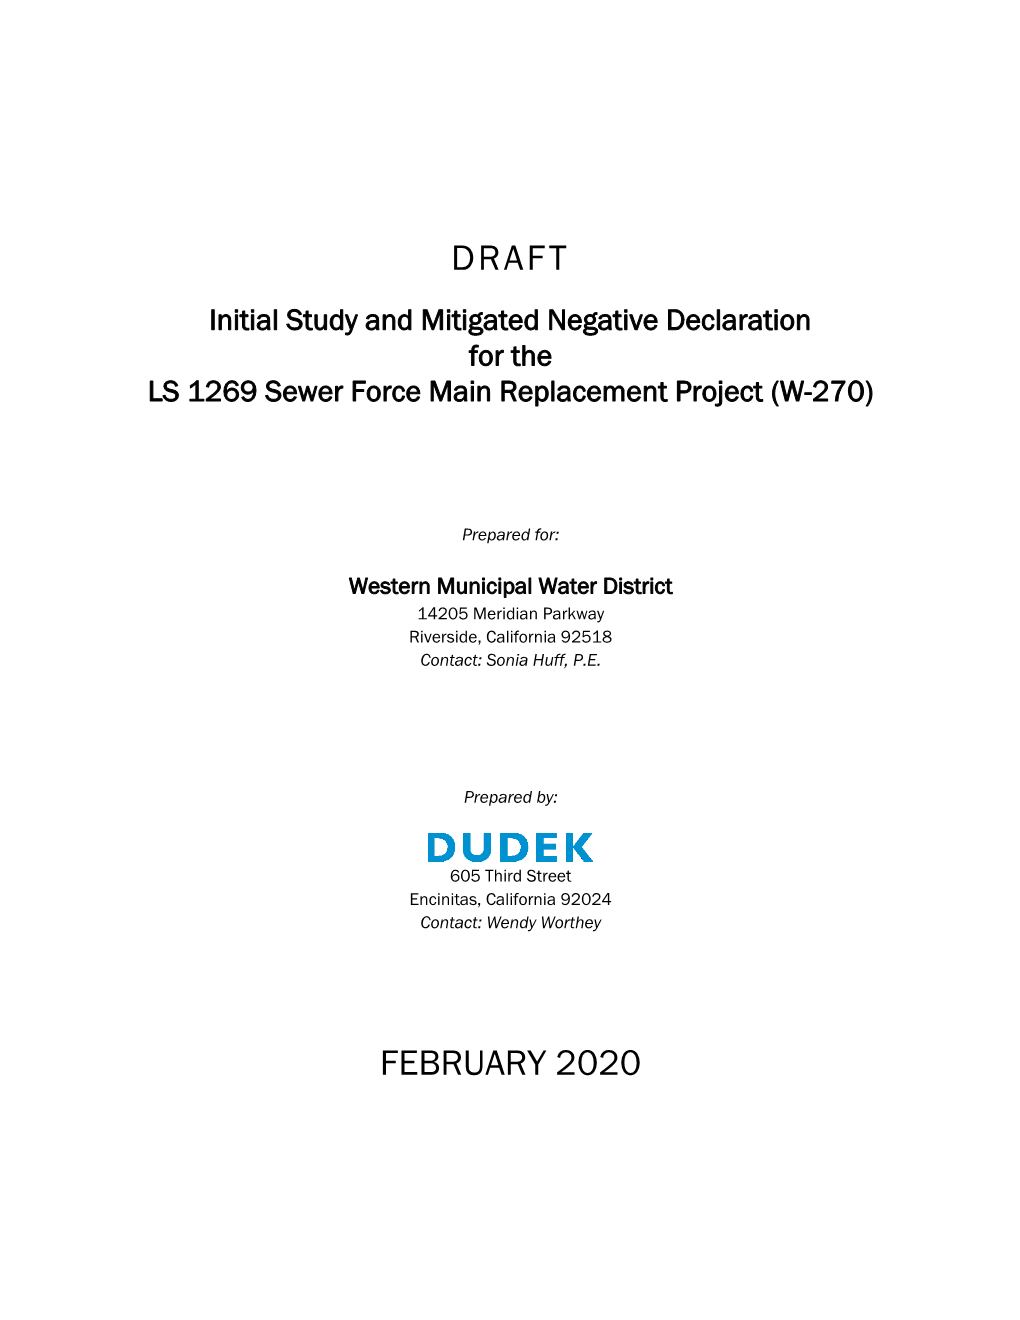 Initial Study and Mitigated Negative Declaration for the LS 1269 Sewer Force Main Replacement Project (W-270)